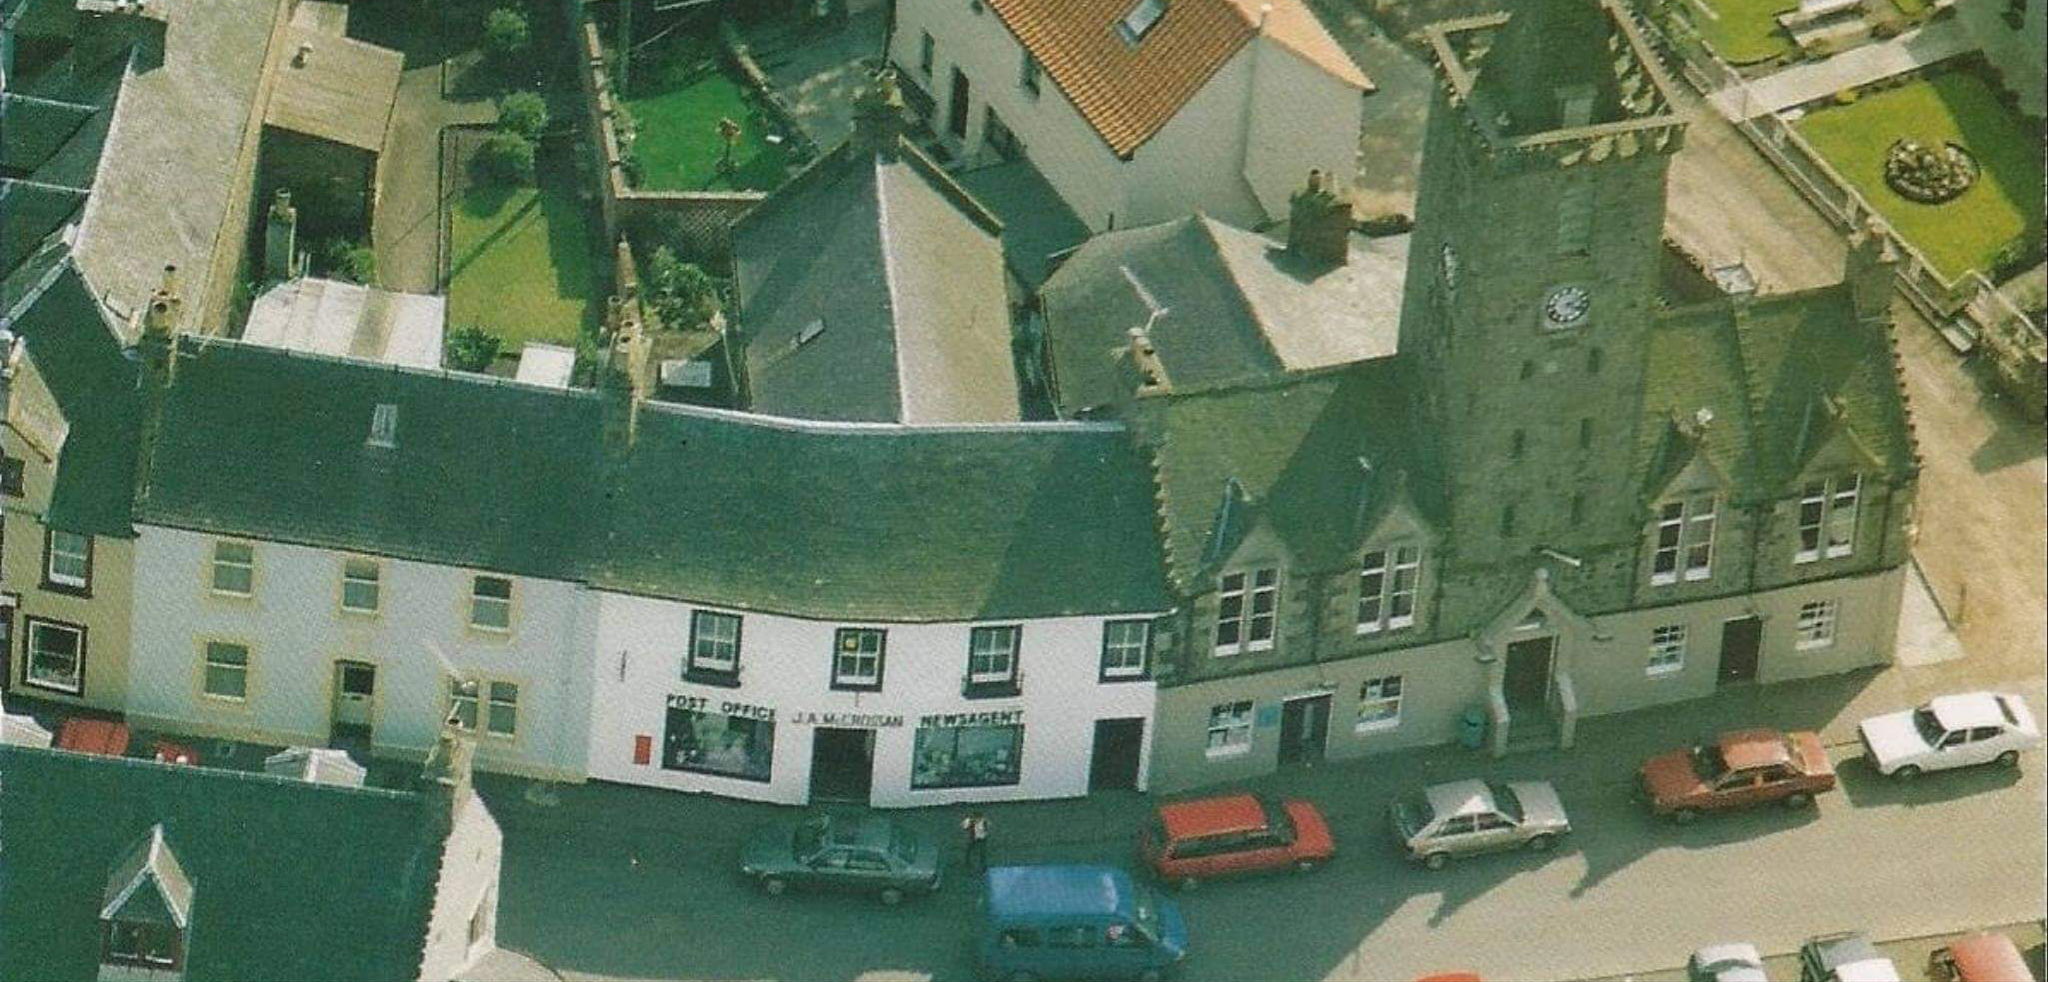 The Post Office in Auchtermuchty, Fife.